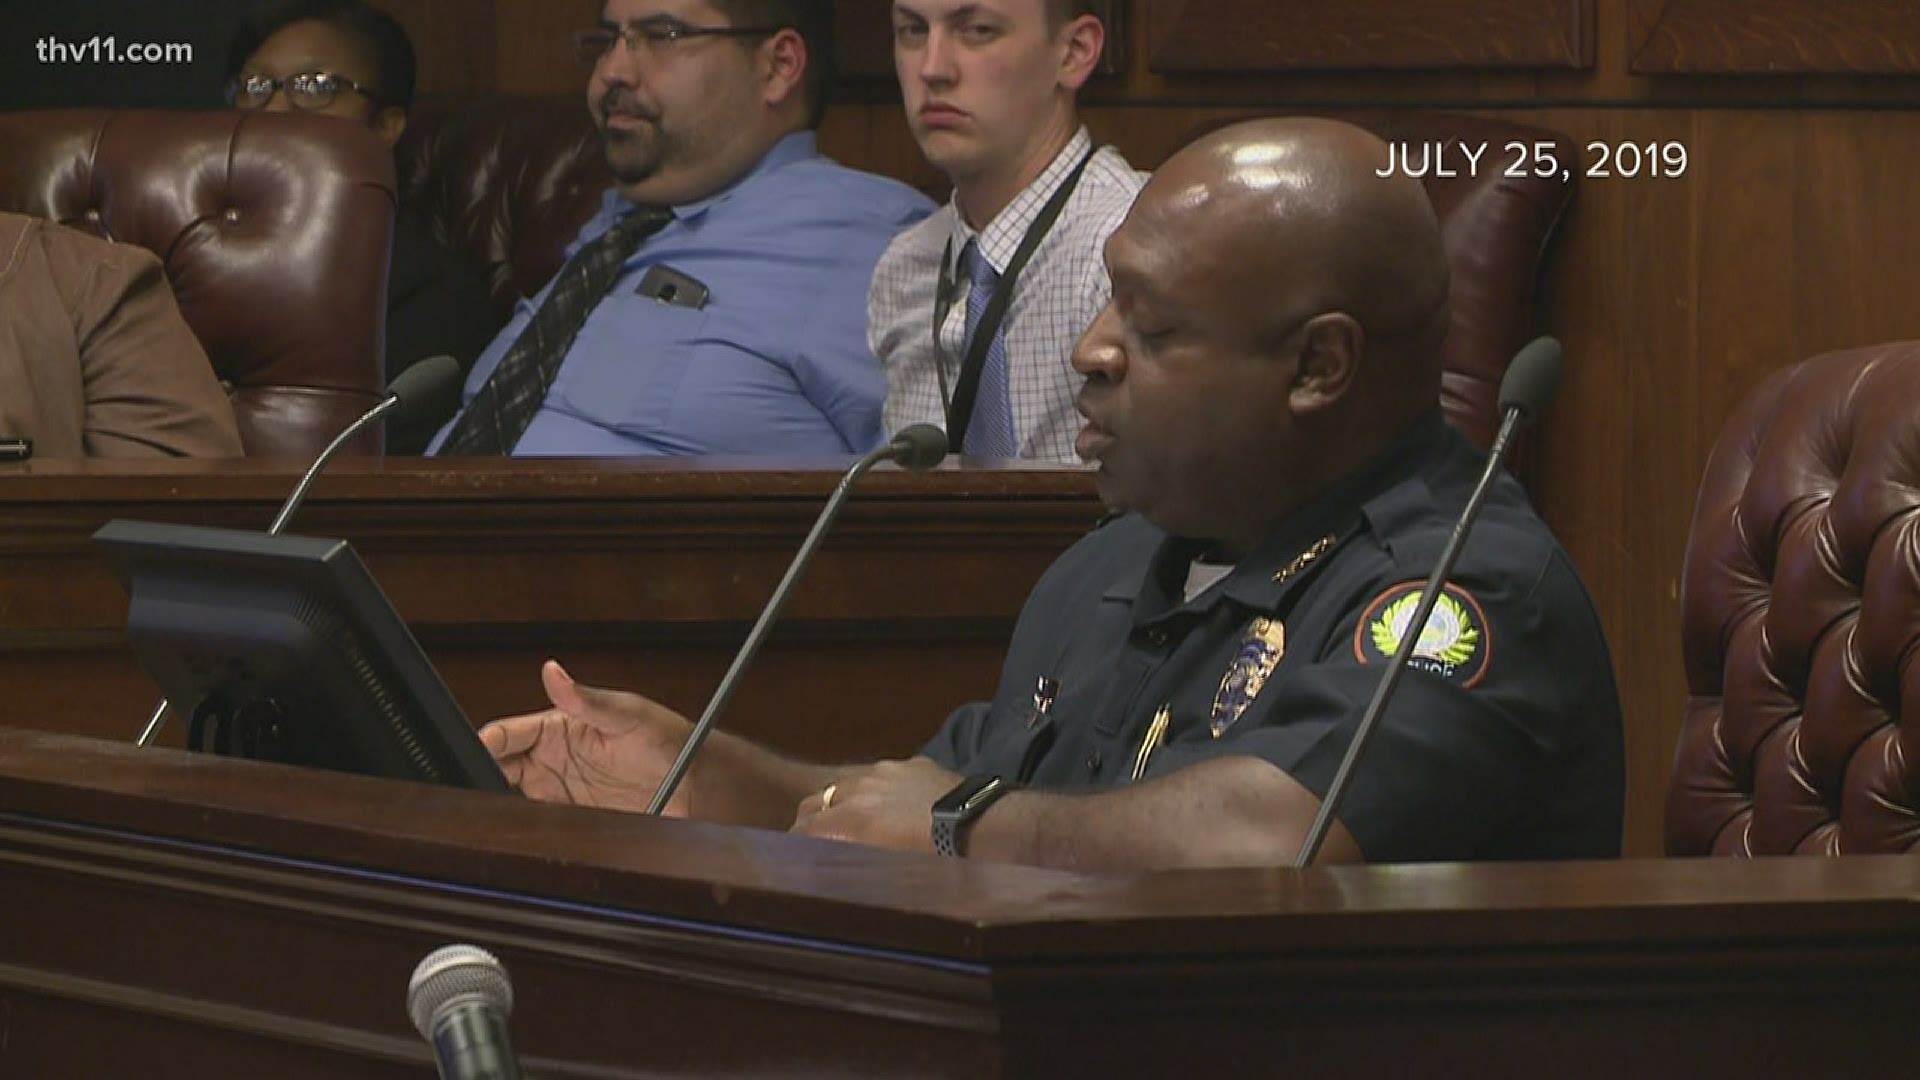 Little Rock Police Department Assistant Chief Hayward Finks is suing Chief Keith Humphrey and the city - over his testimony during Officer Charles Starks' hearing.